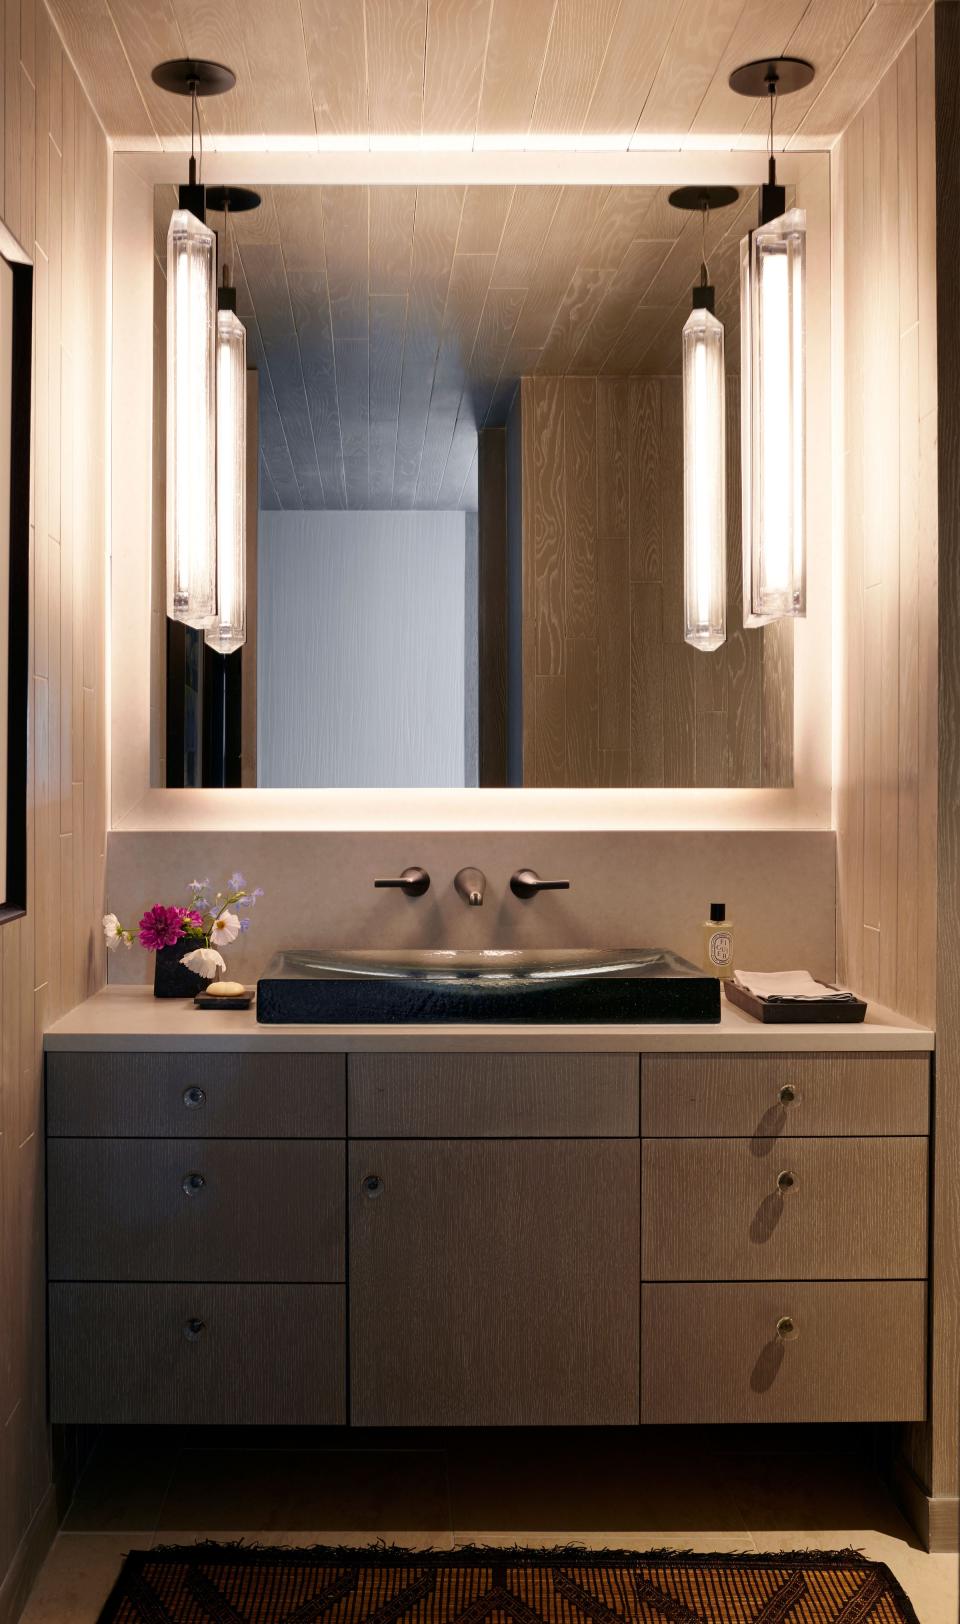 This powder room got a light makeover: An existing vanity was refinished by La Polla Designs and topped with a Kohler Antilia Wading Pool glass sink. The pendants are from Hersh Design.